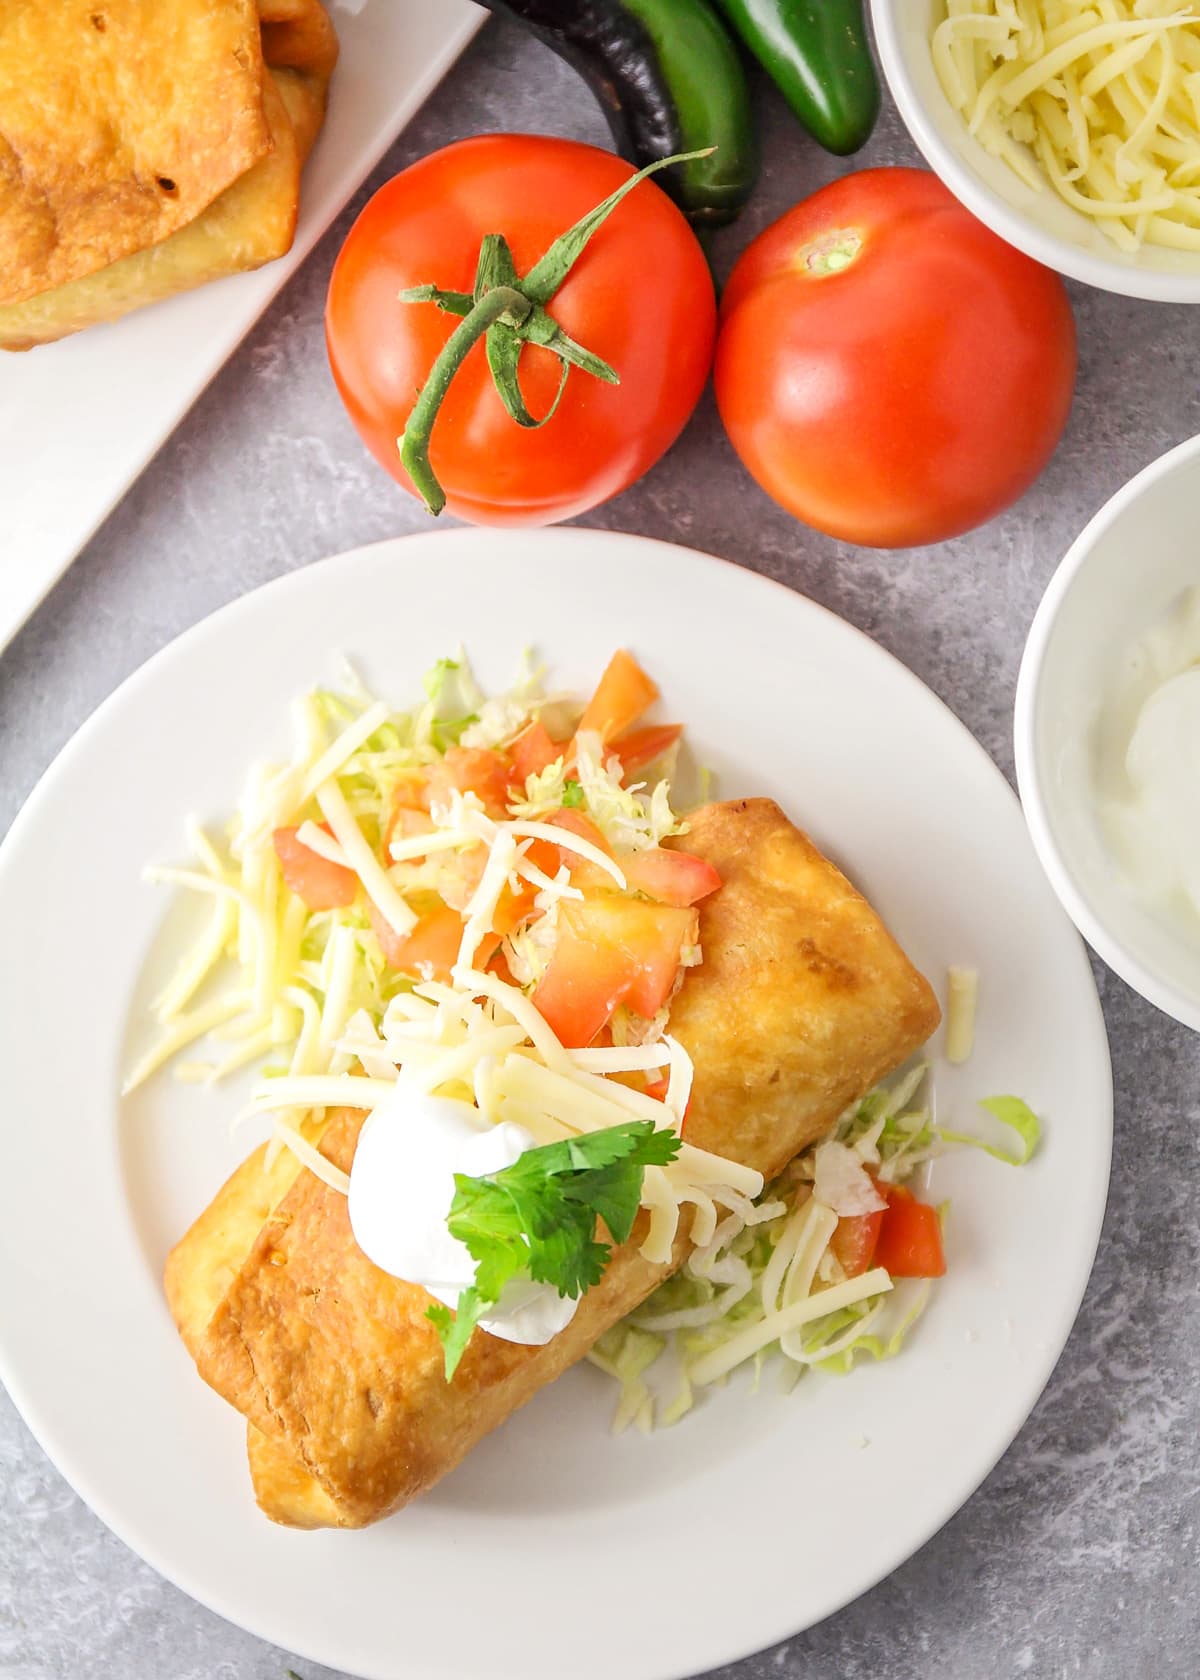 Chimichanga recipe garnished with cheese and served on a white plate